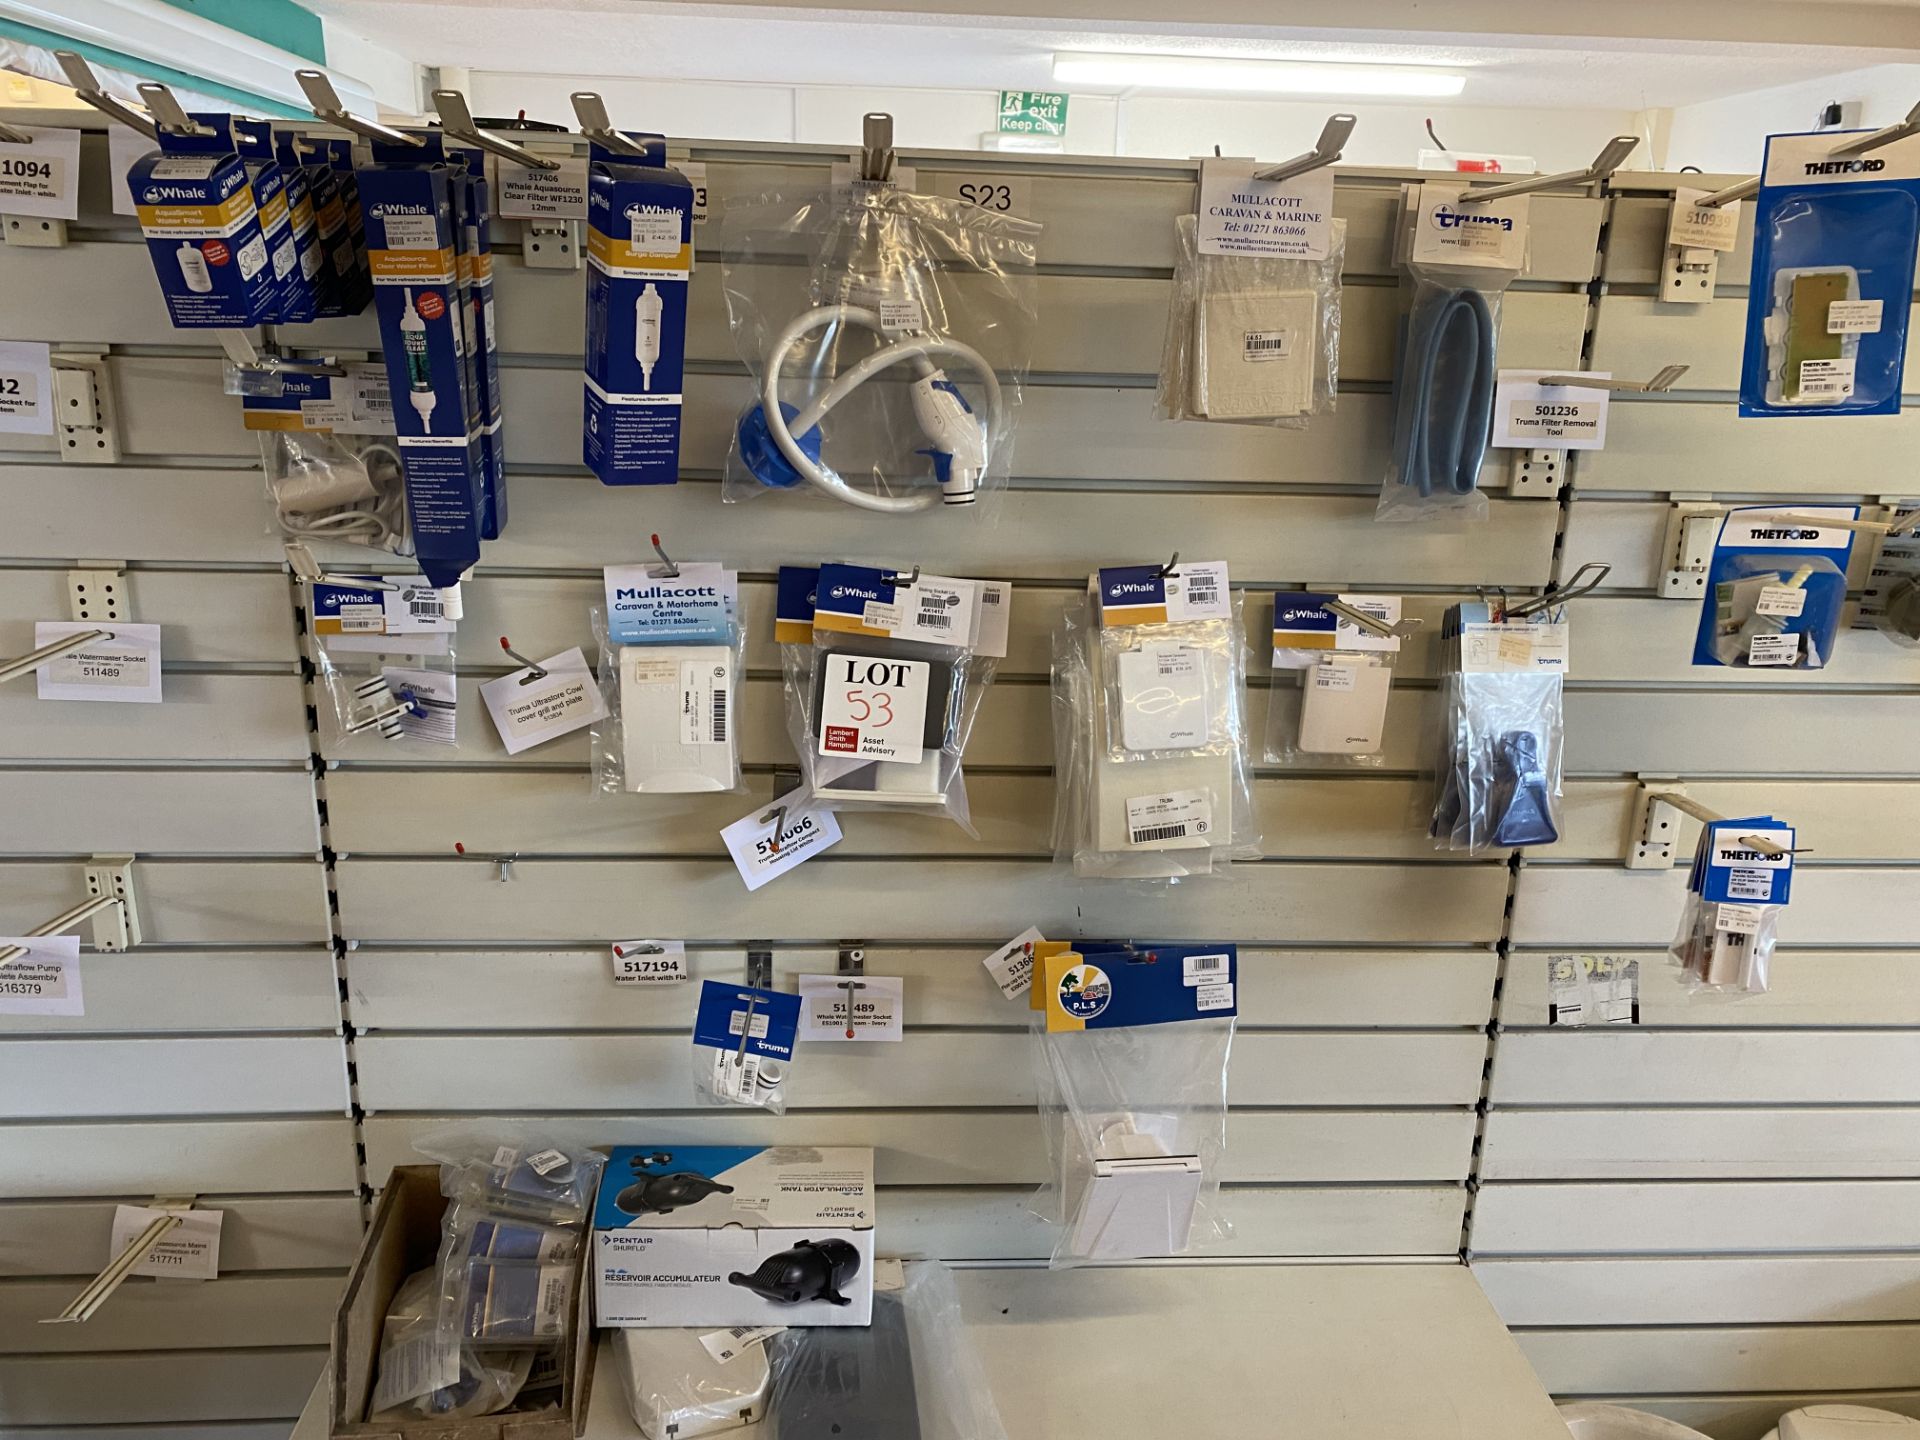 Contents of shelf to include water filters, inlet pipes, side sockets, hosing & reservoir